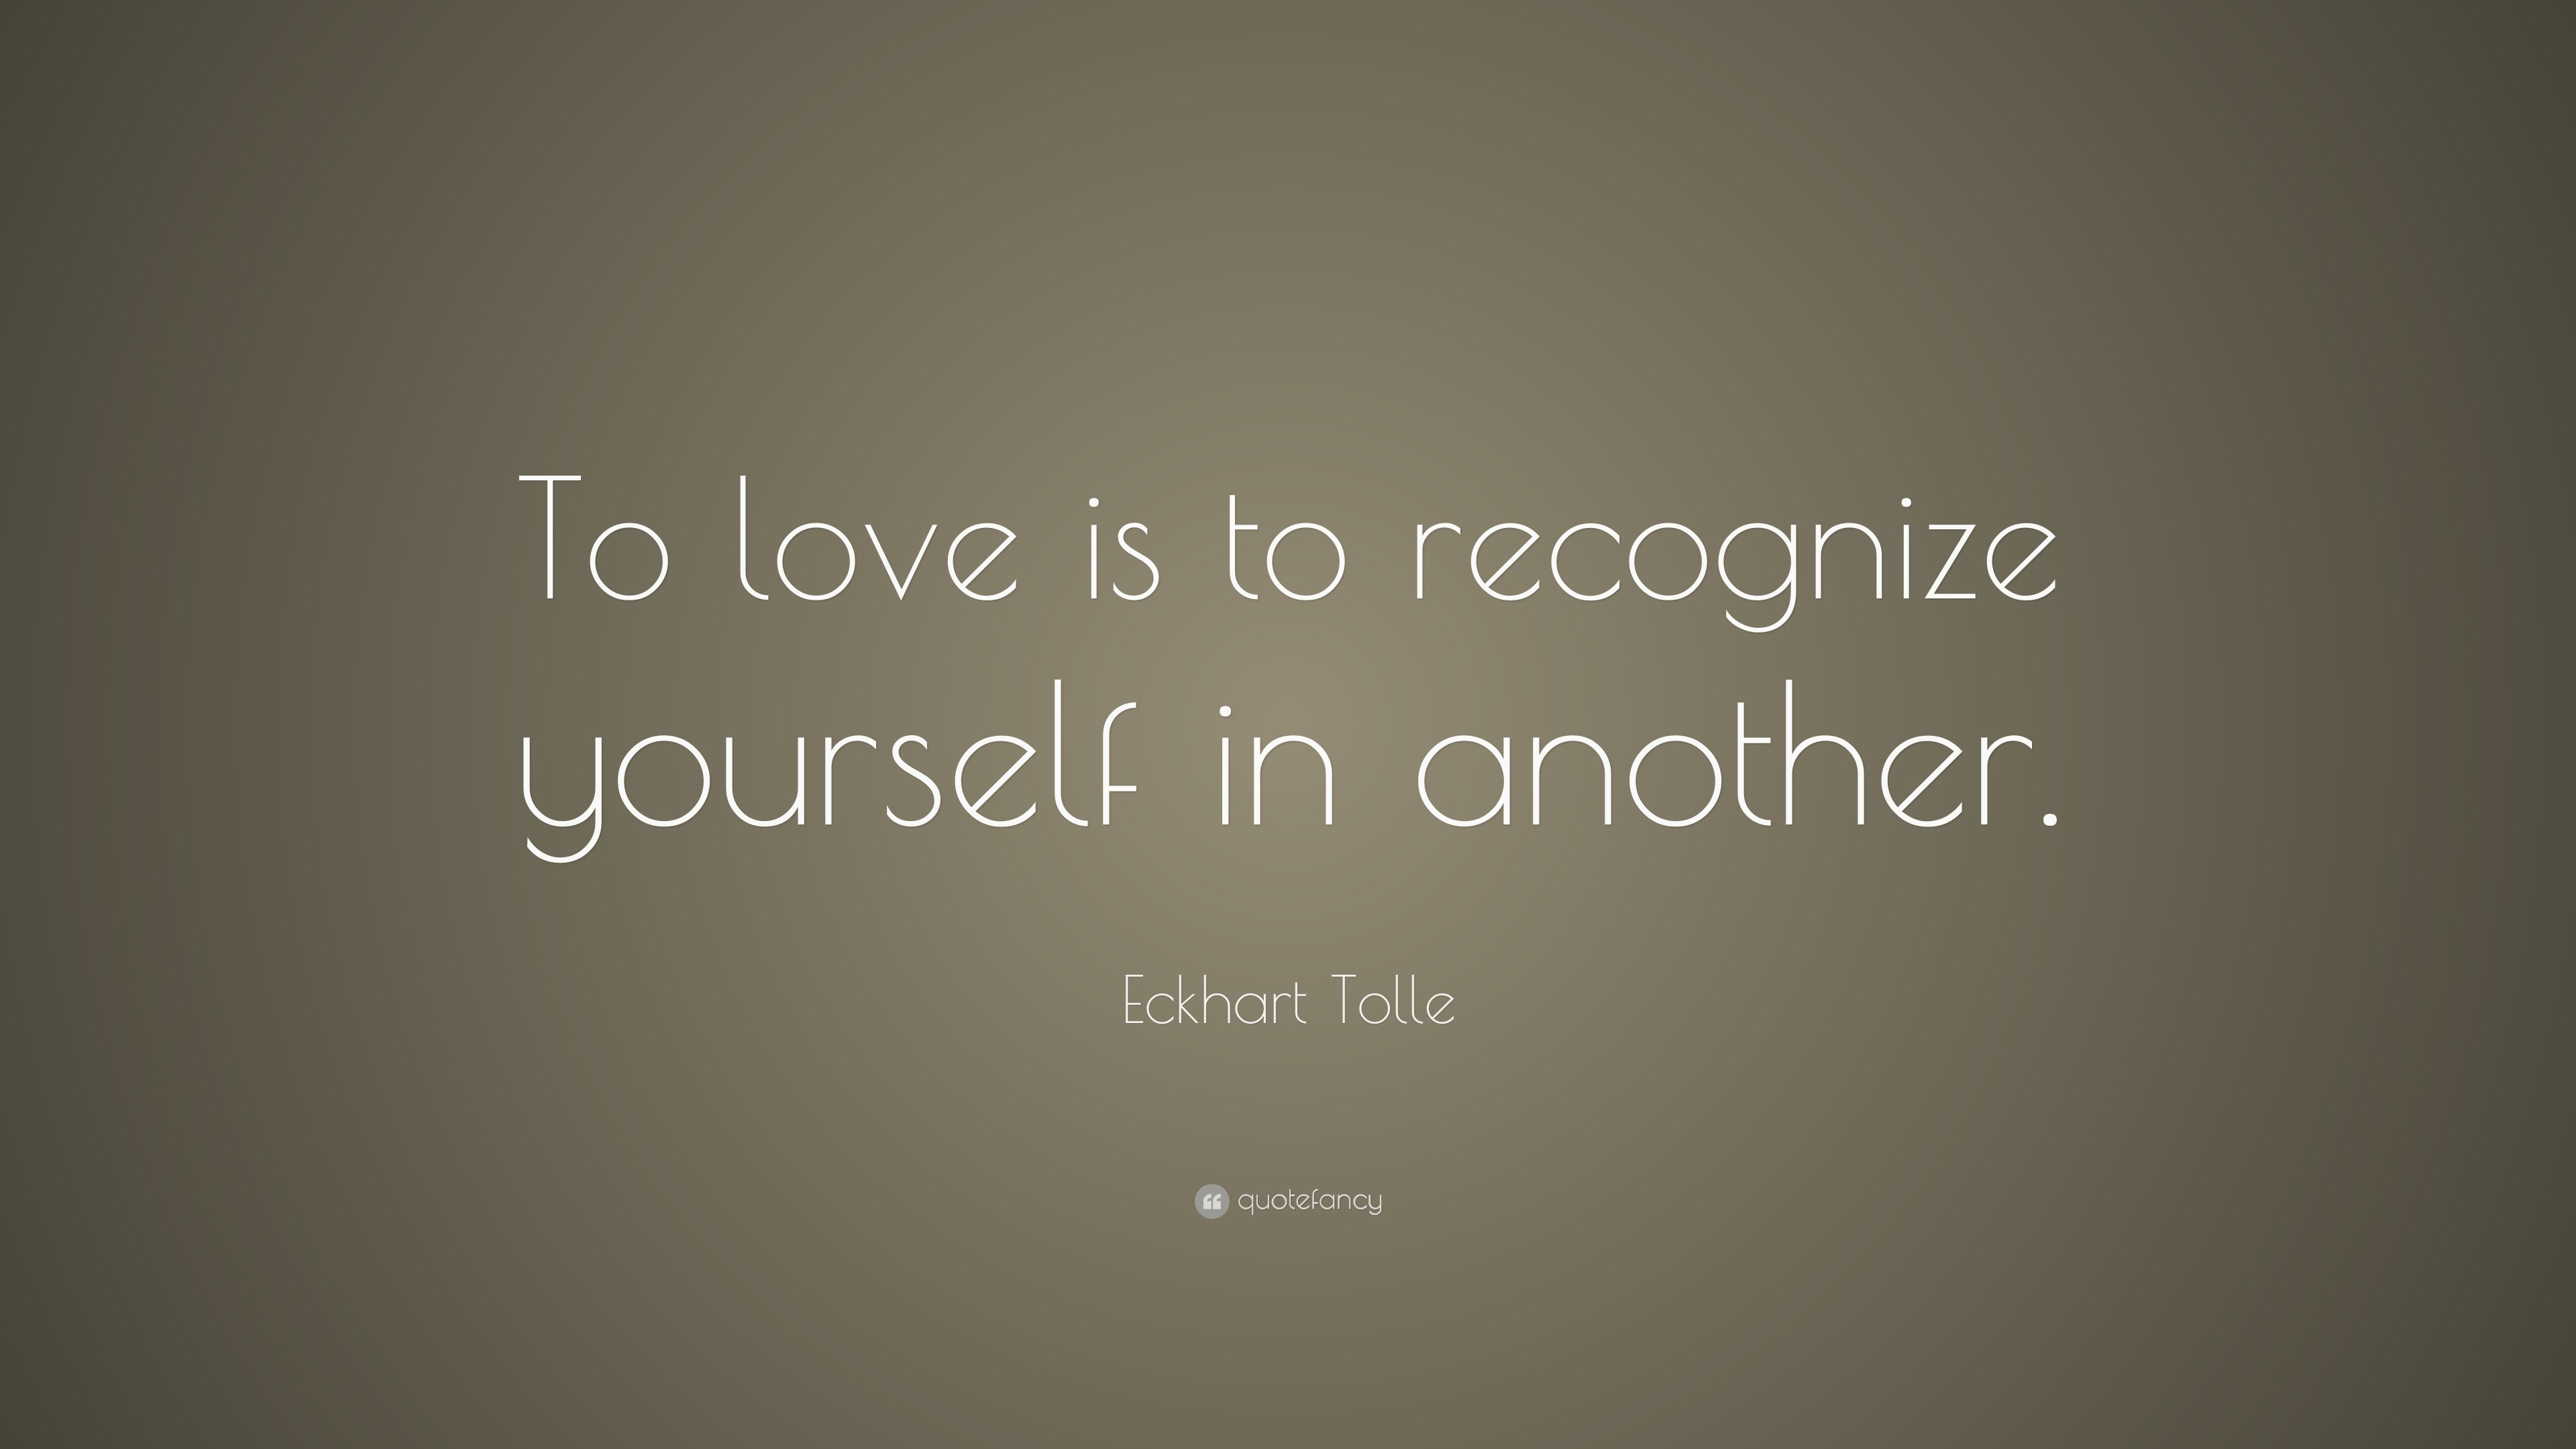 Eckhart Tolle Quote: “To love is to recognize yourself in another.”